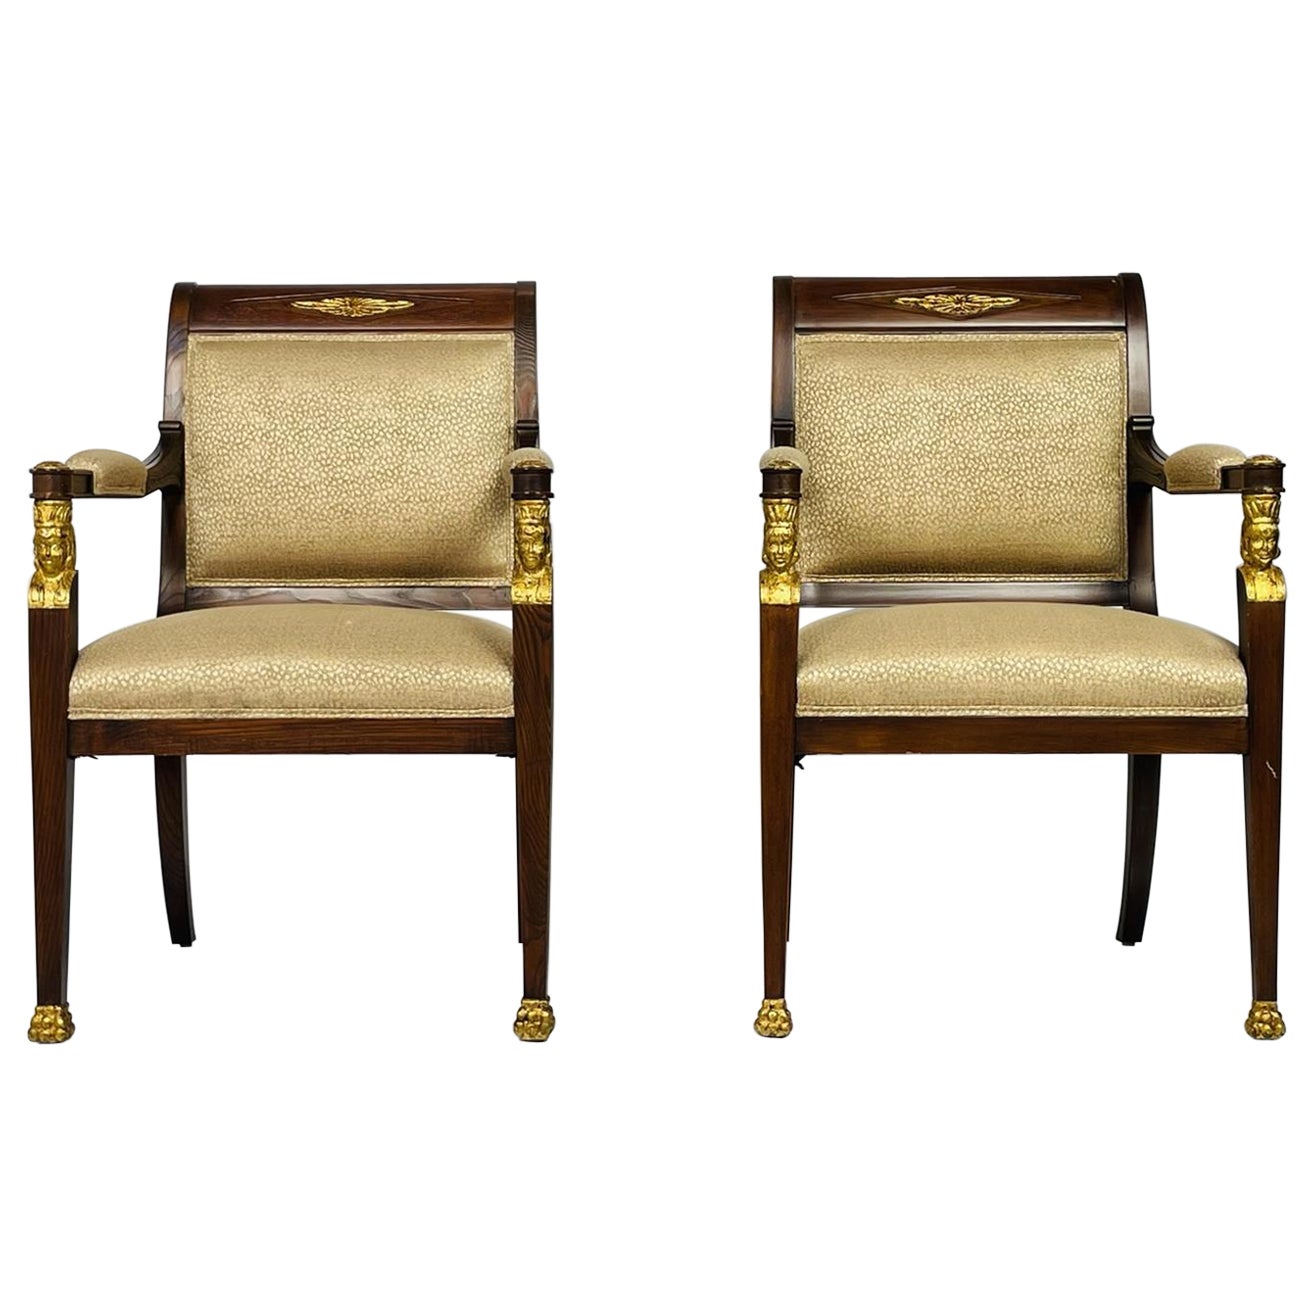 French Empire style Mahogany Armchairs Giltwood im Angebot